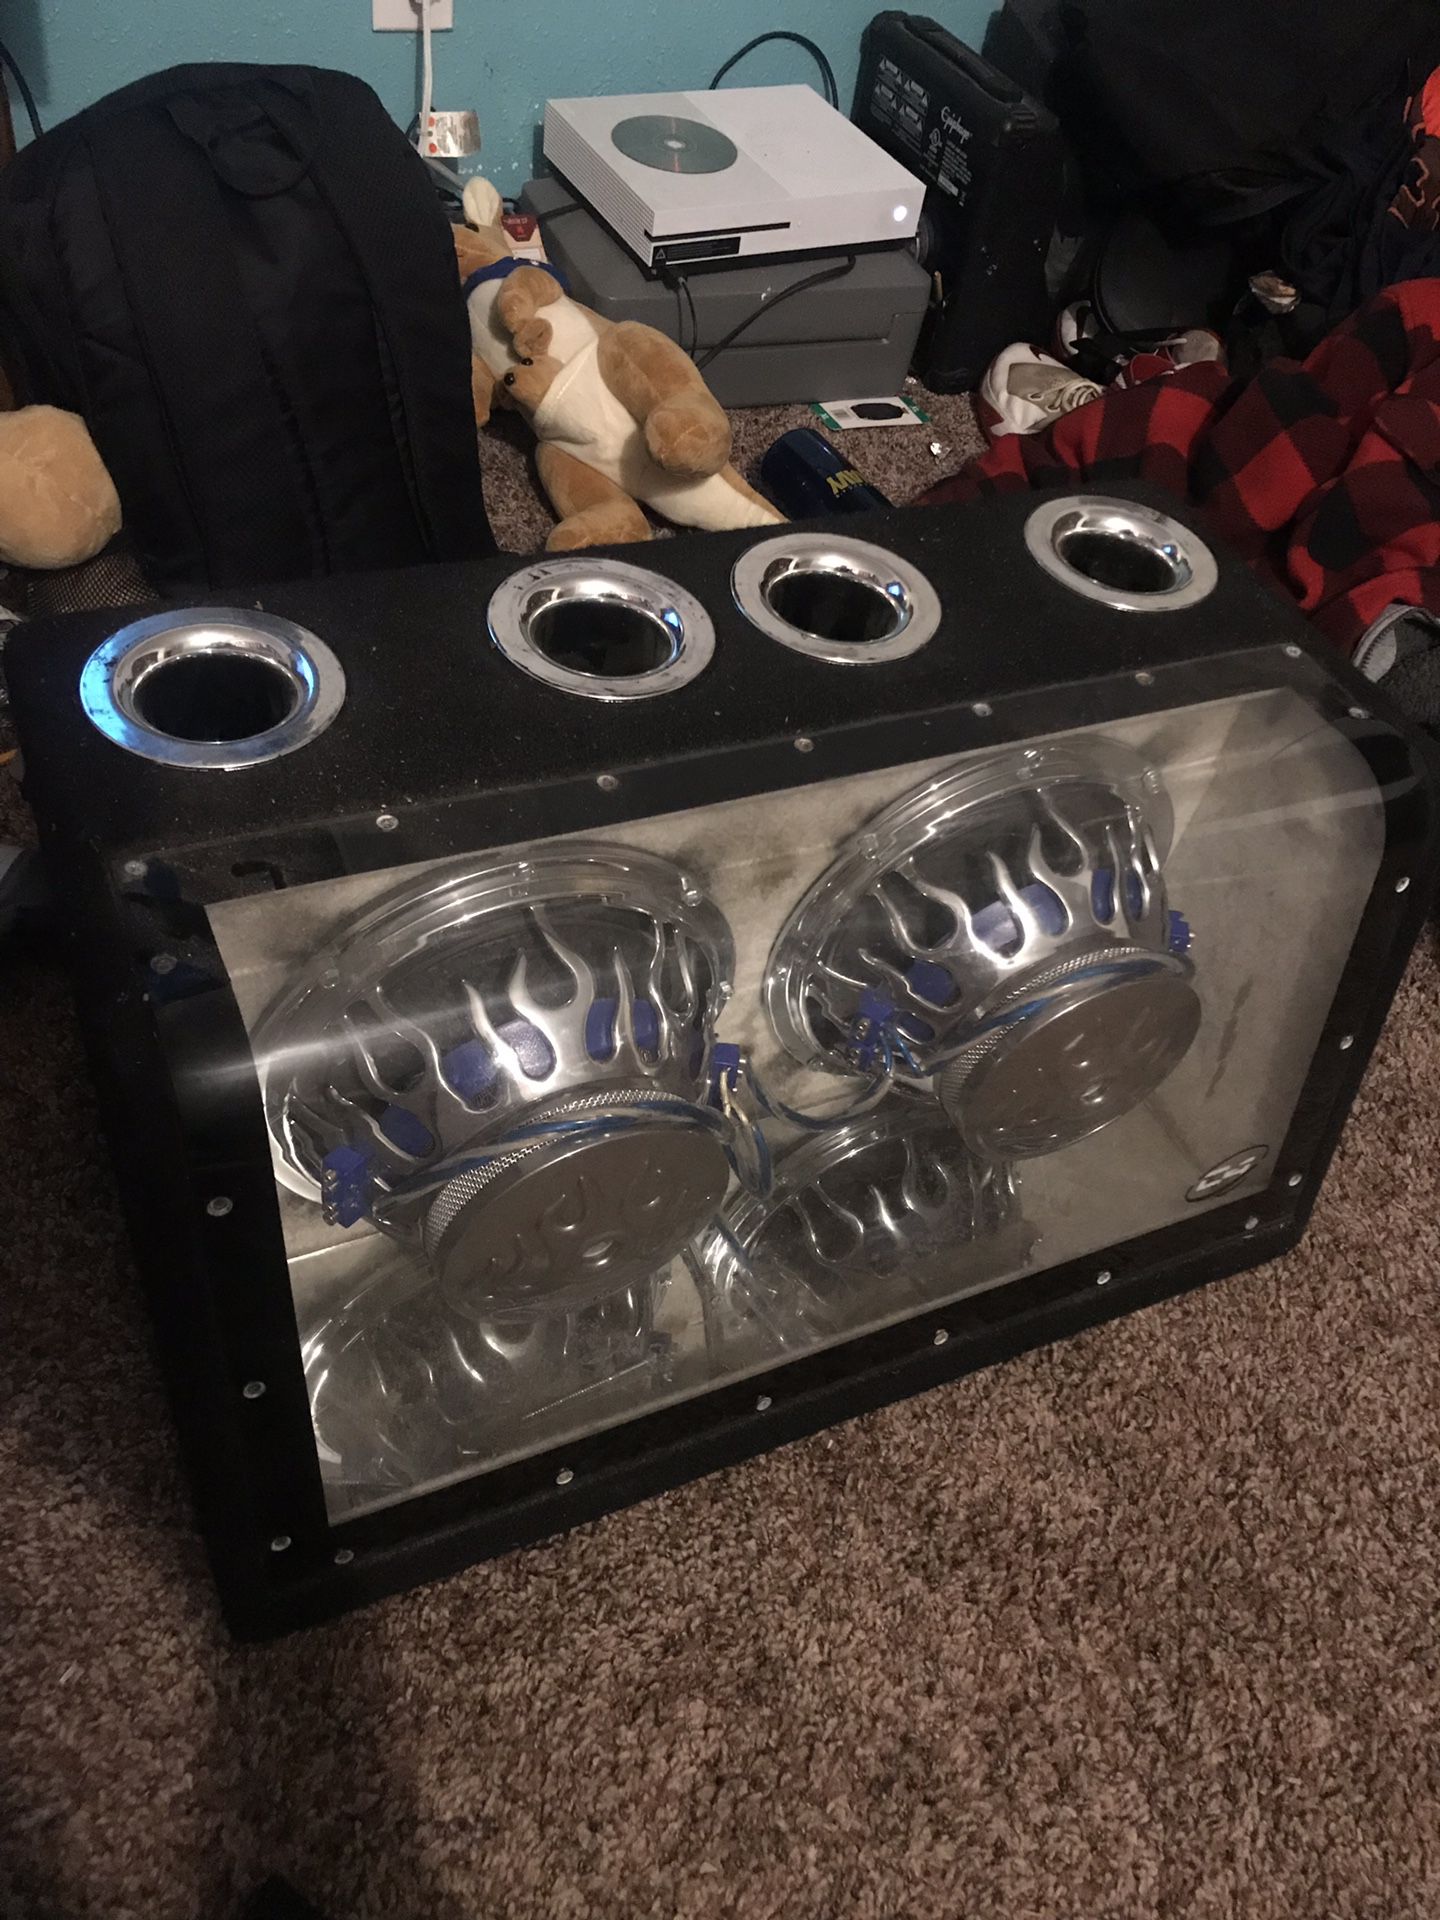 2 12” subs and box